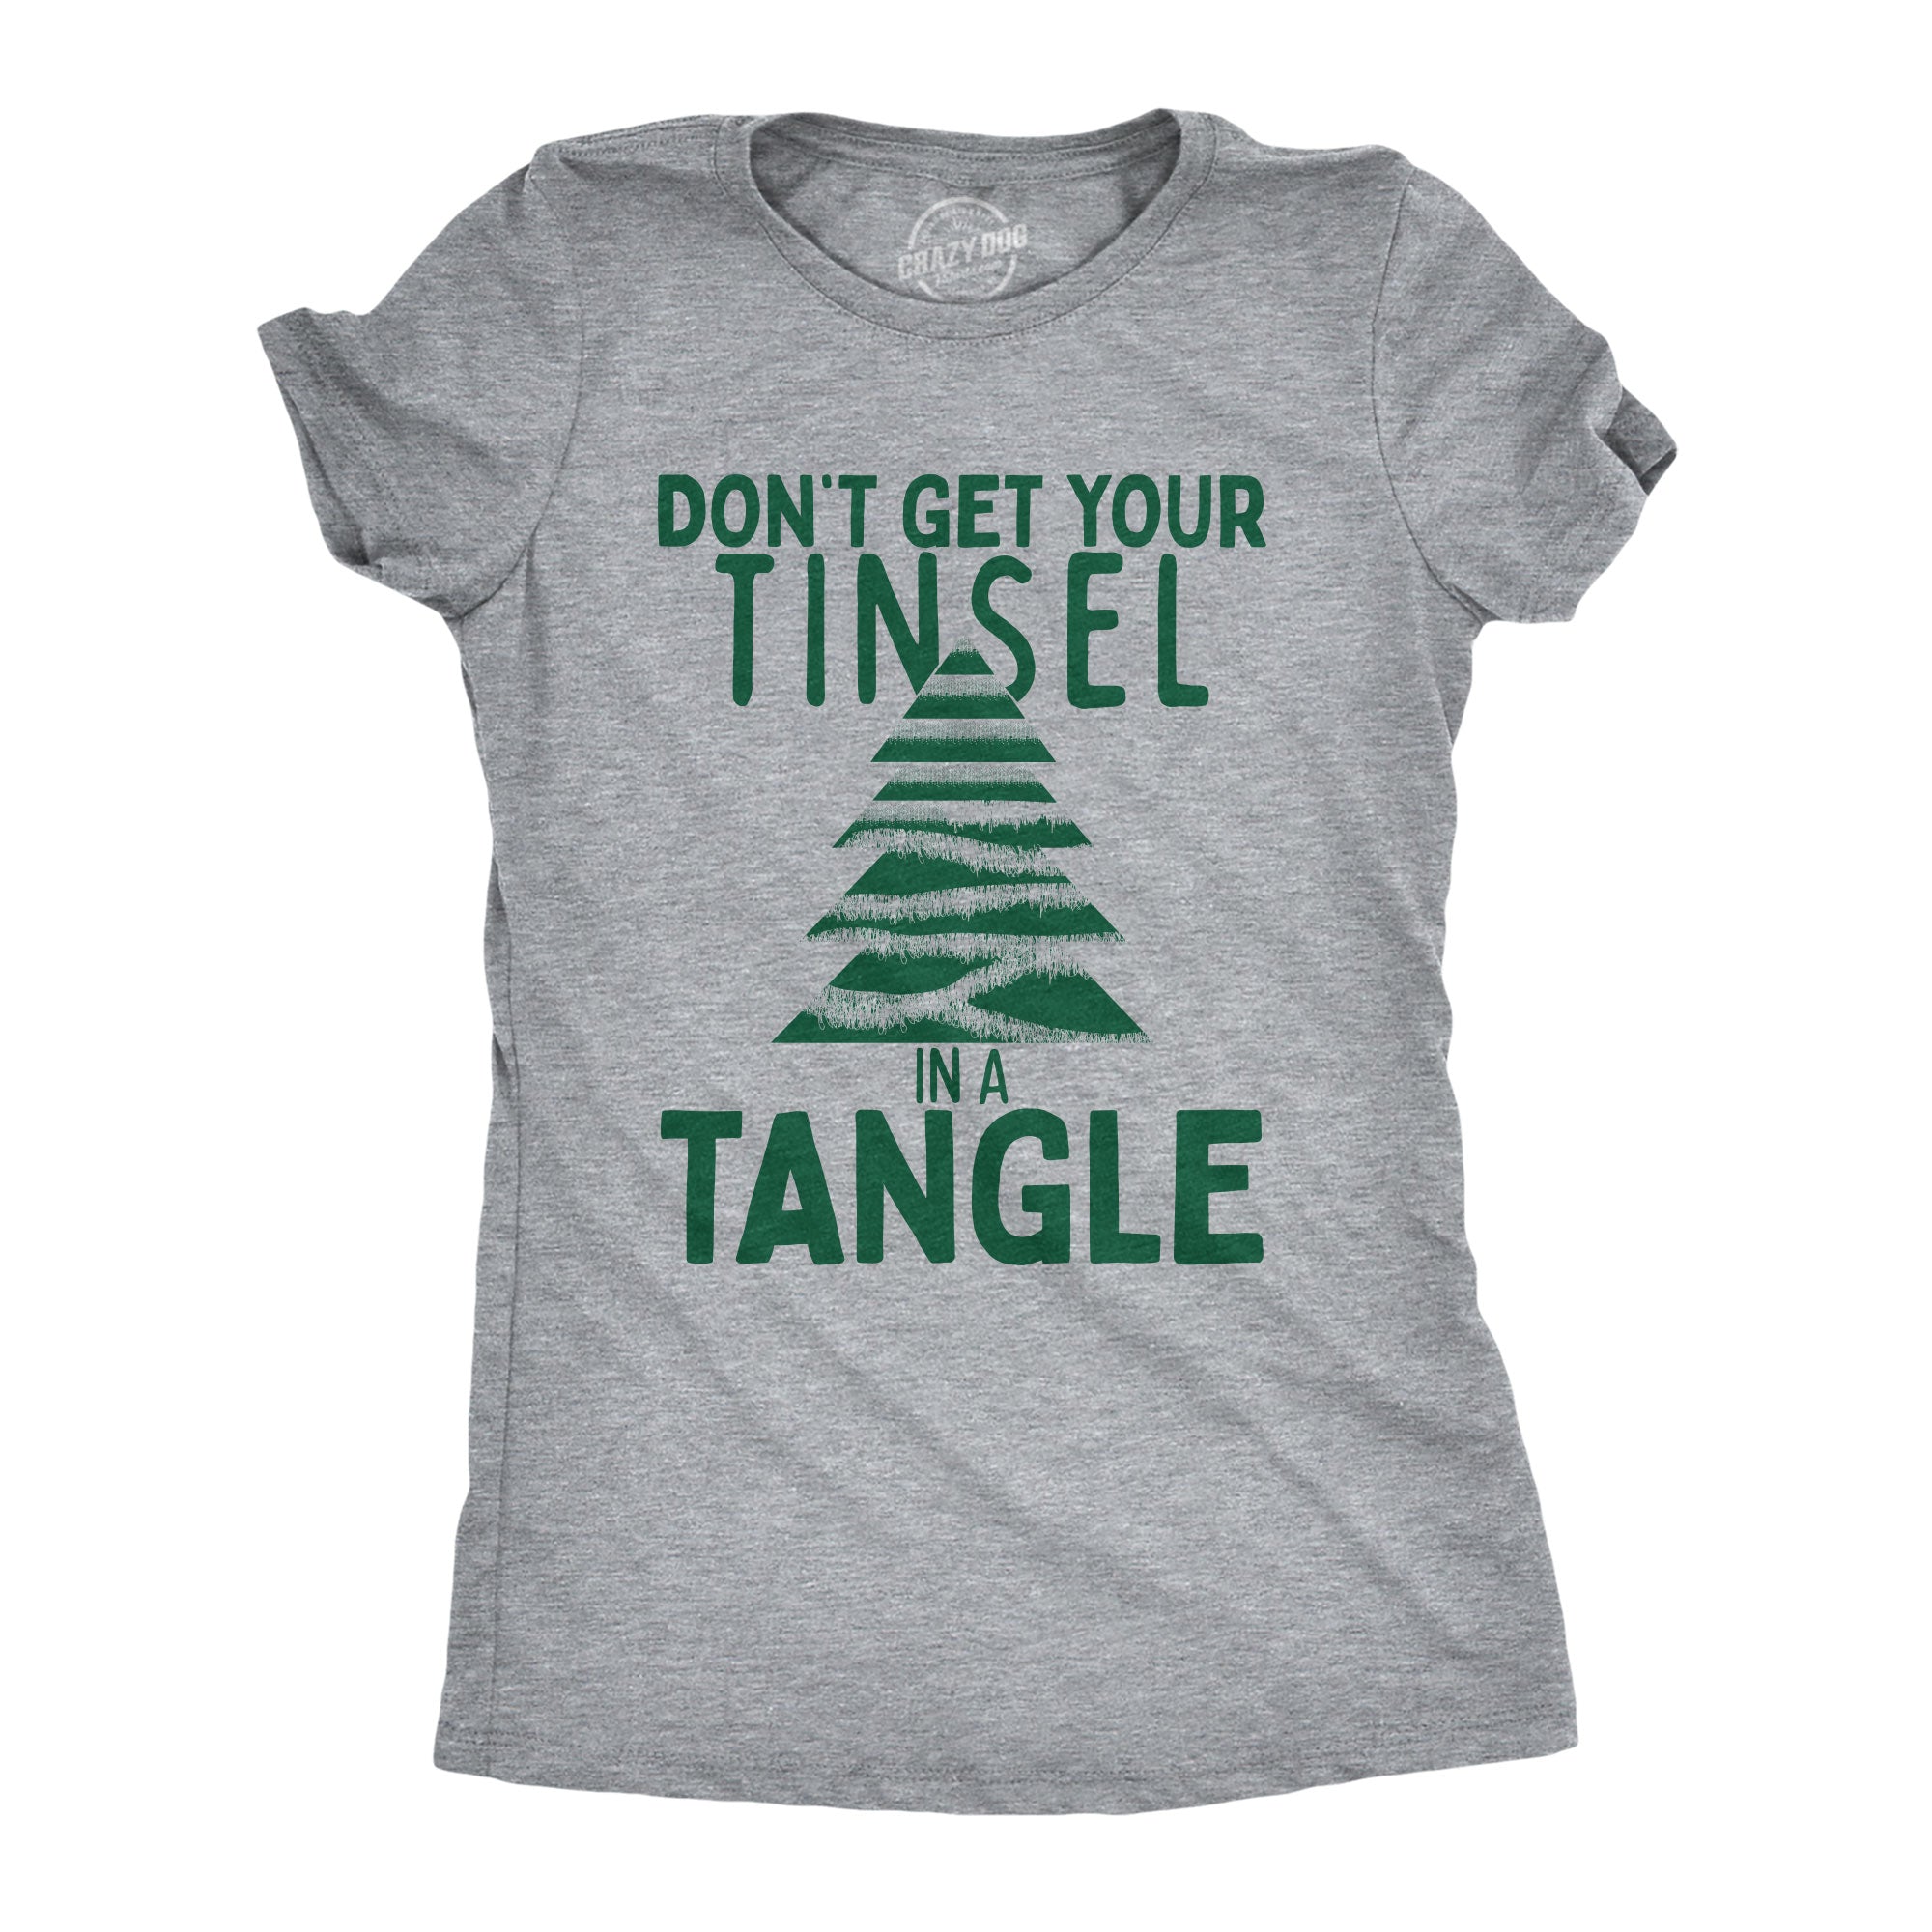 Funny Light Heather Grey - TINSEL Dont Get Your Tinsel In A Tangle Womens T Shirt Nerdy Christmas Sarcastic Tee